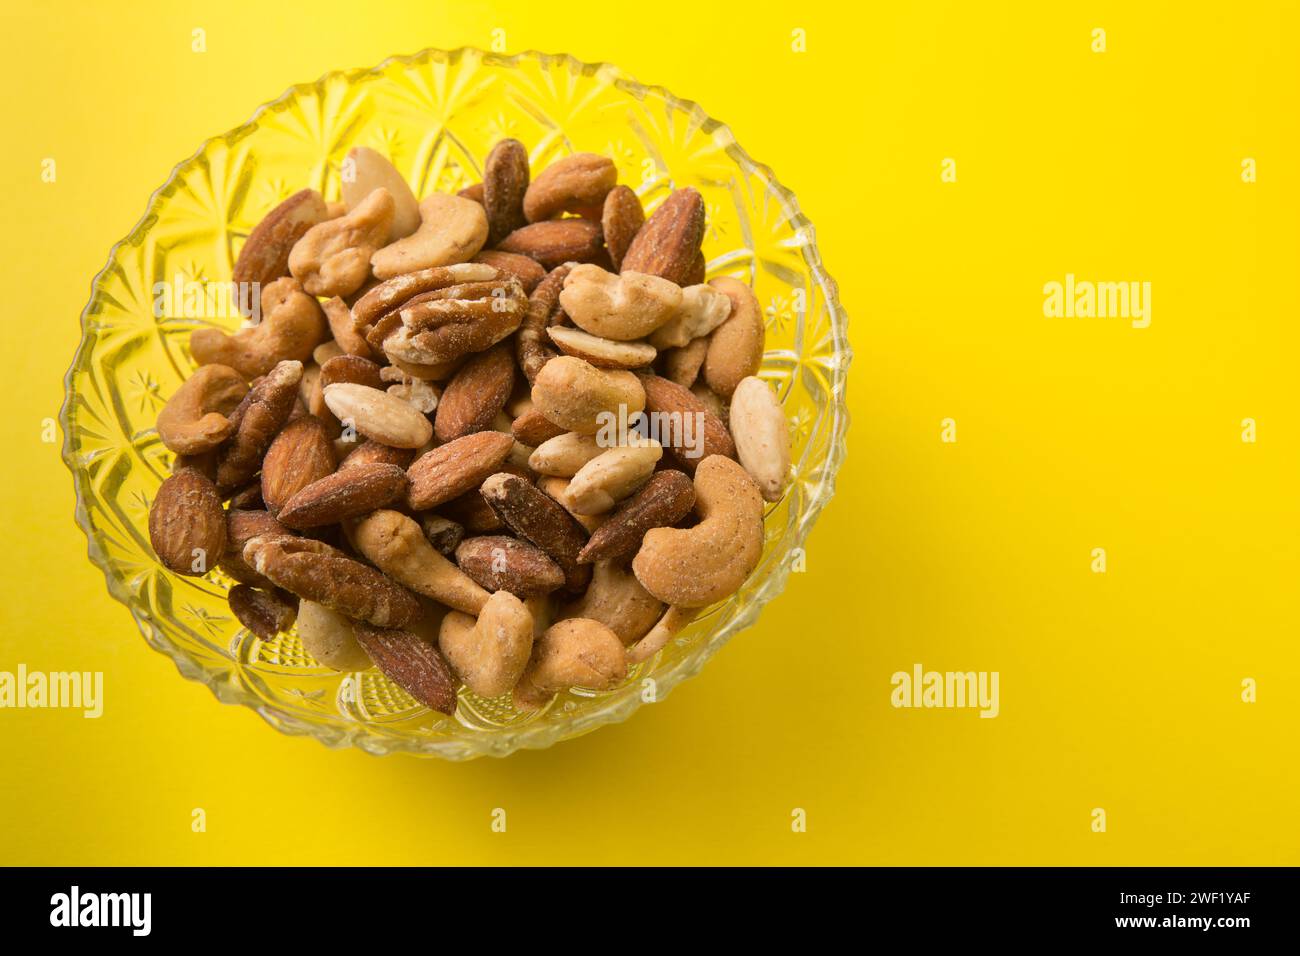 Salted mixed nuts in a glass bowl on a yellow background Stock Photo